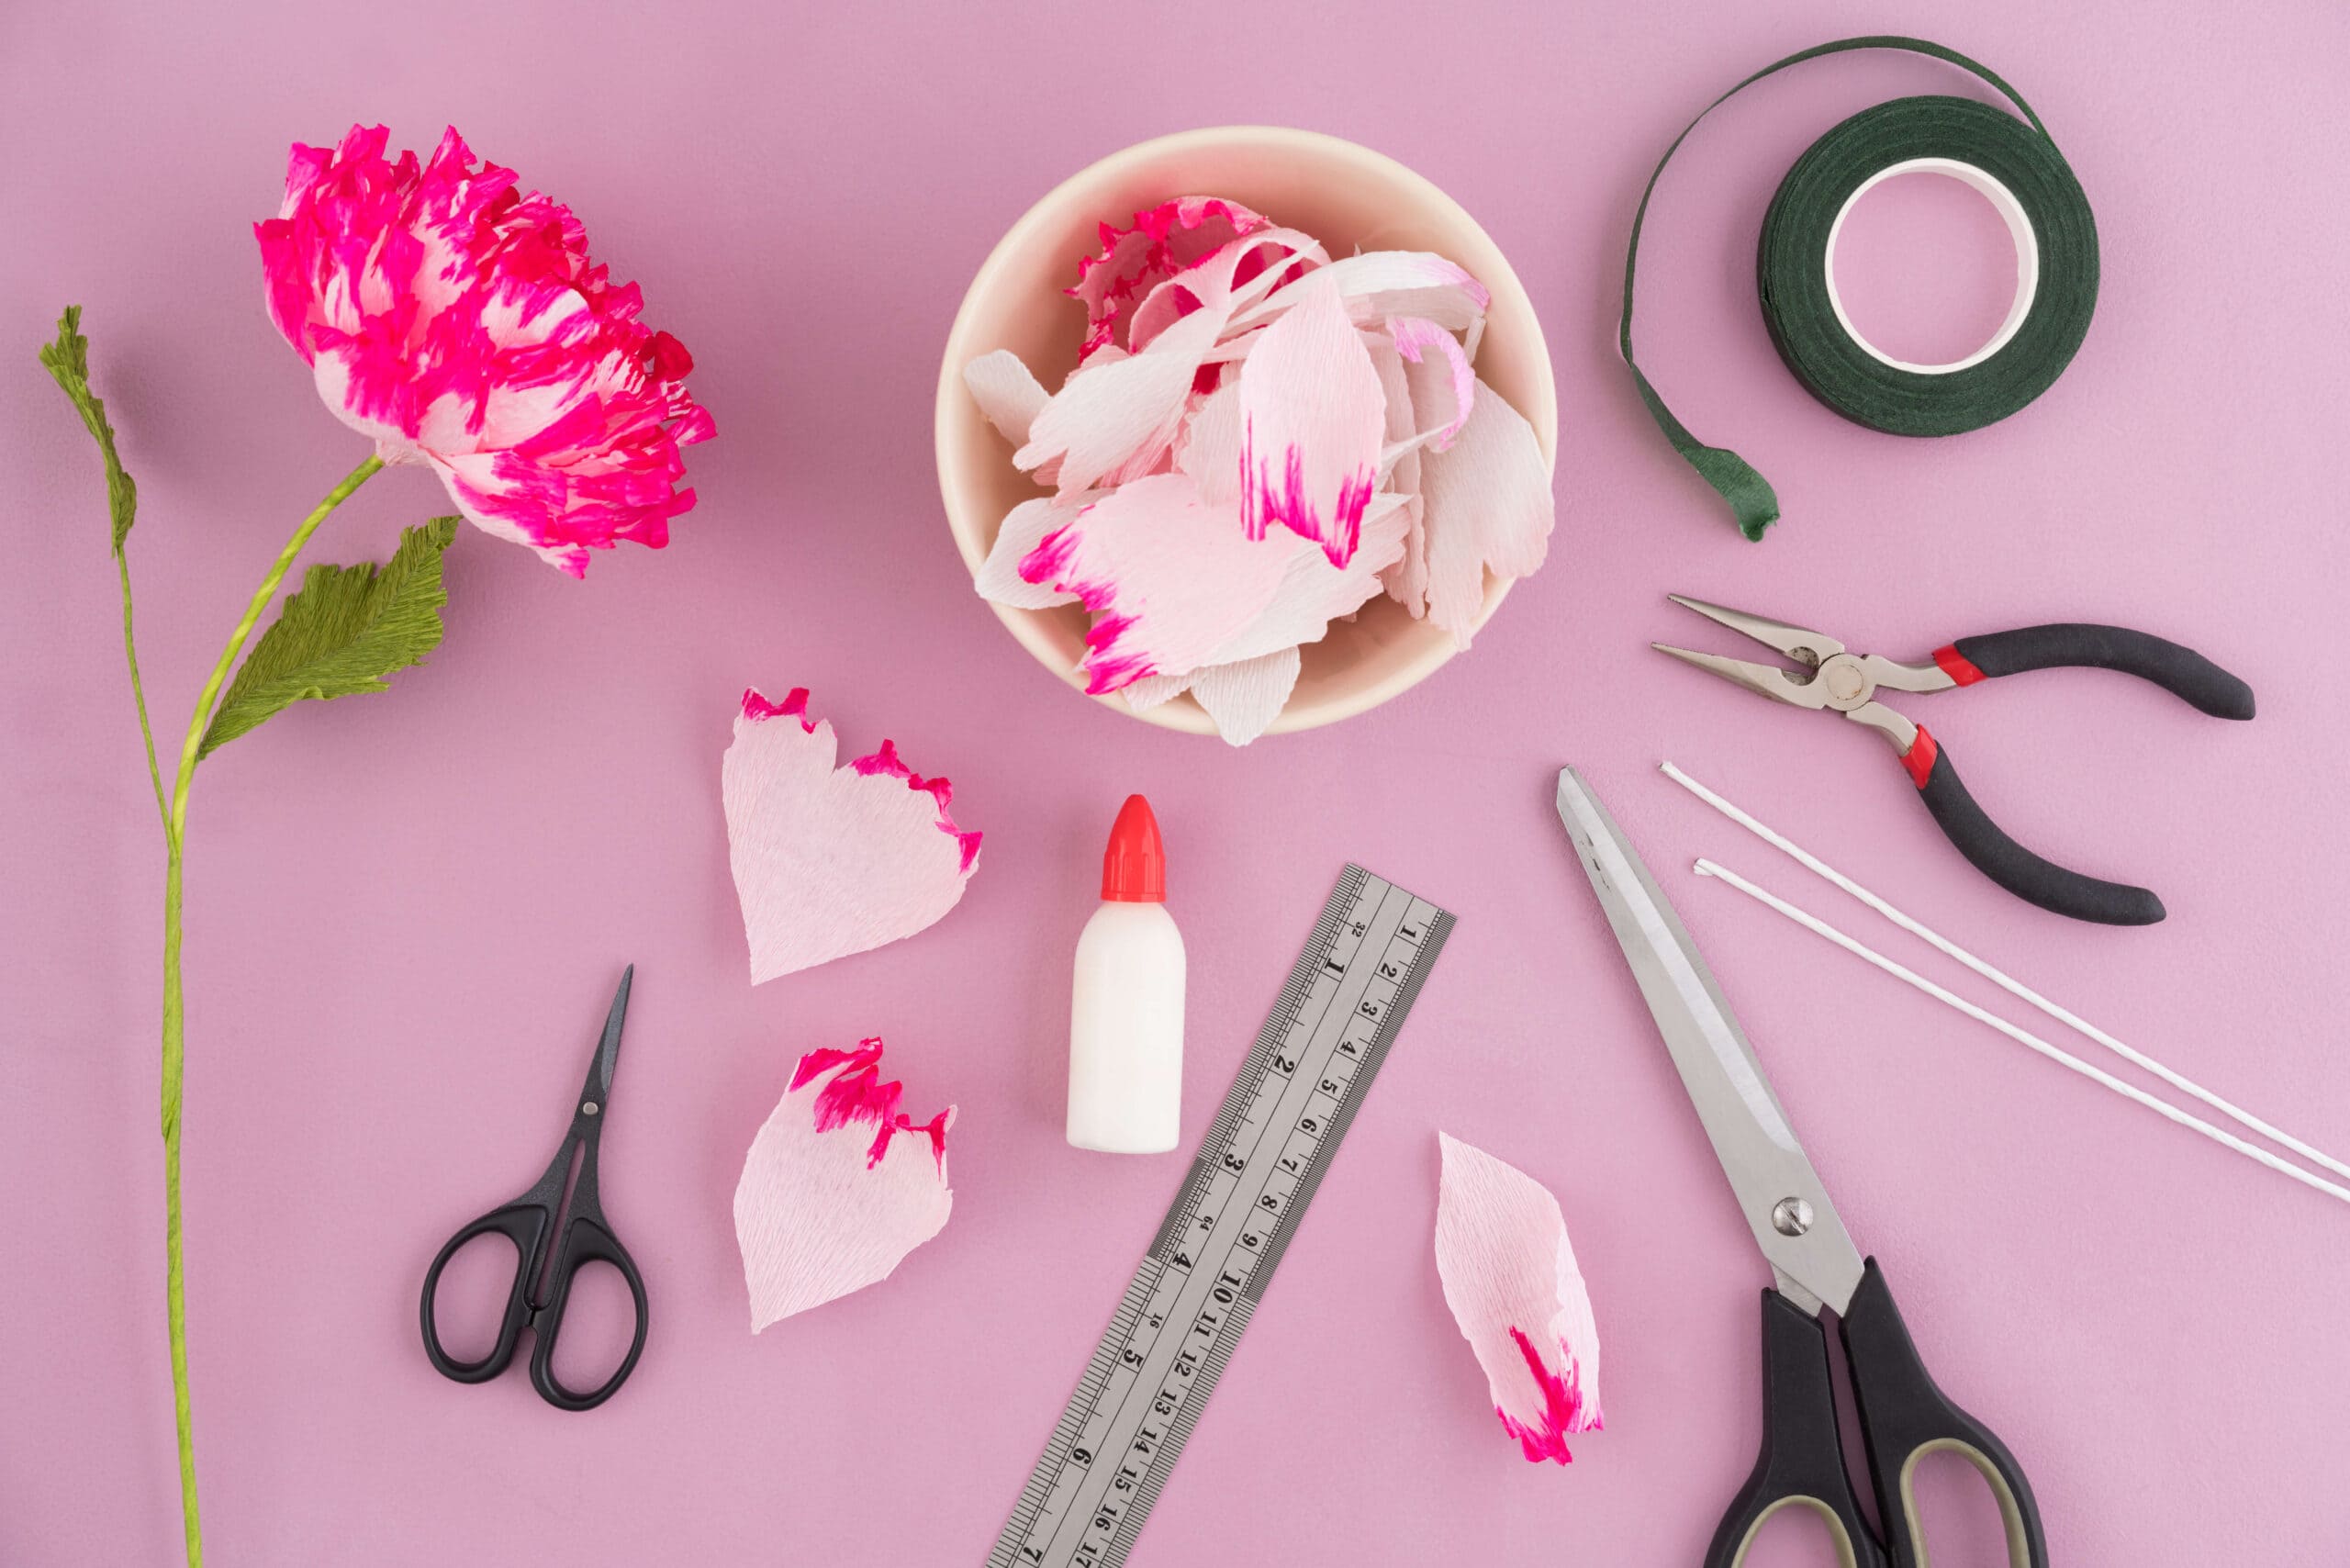 A flatlay of different supplies needed to make crepe paper flowers. White flower petals with pink-dyed tips fill a cream colored bowl. There's floral tape, wires, pliers, glue, a ruler, and scissors.